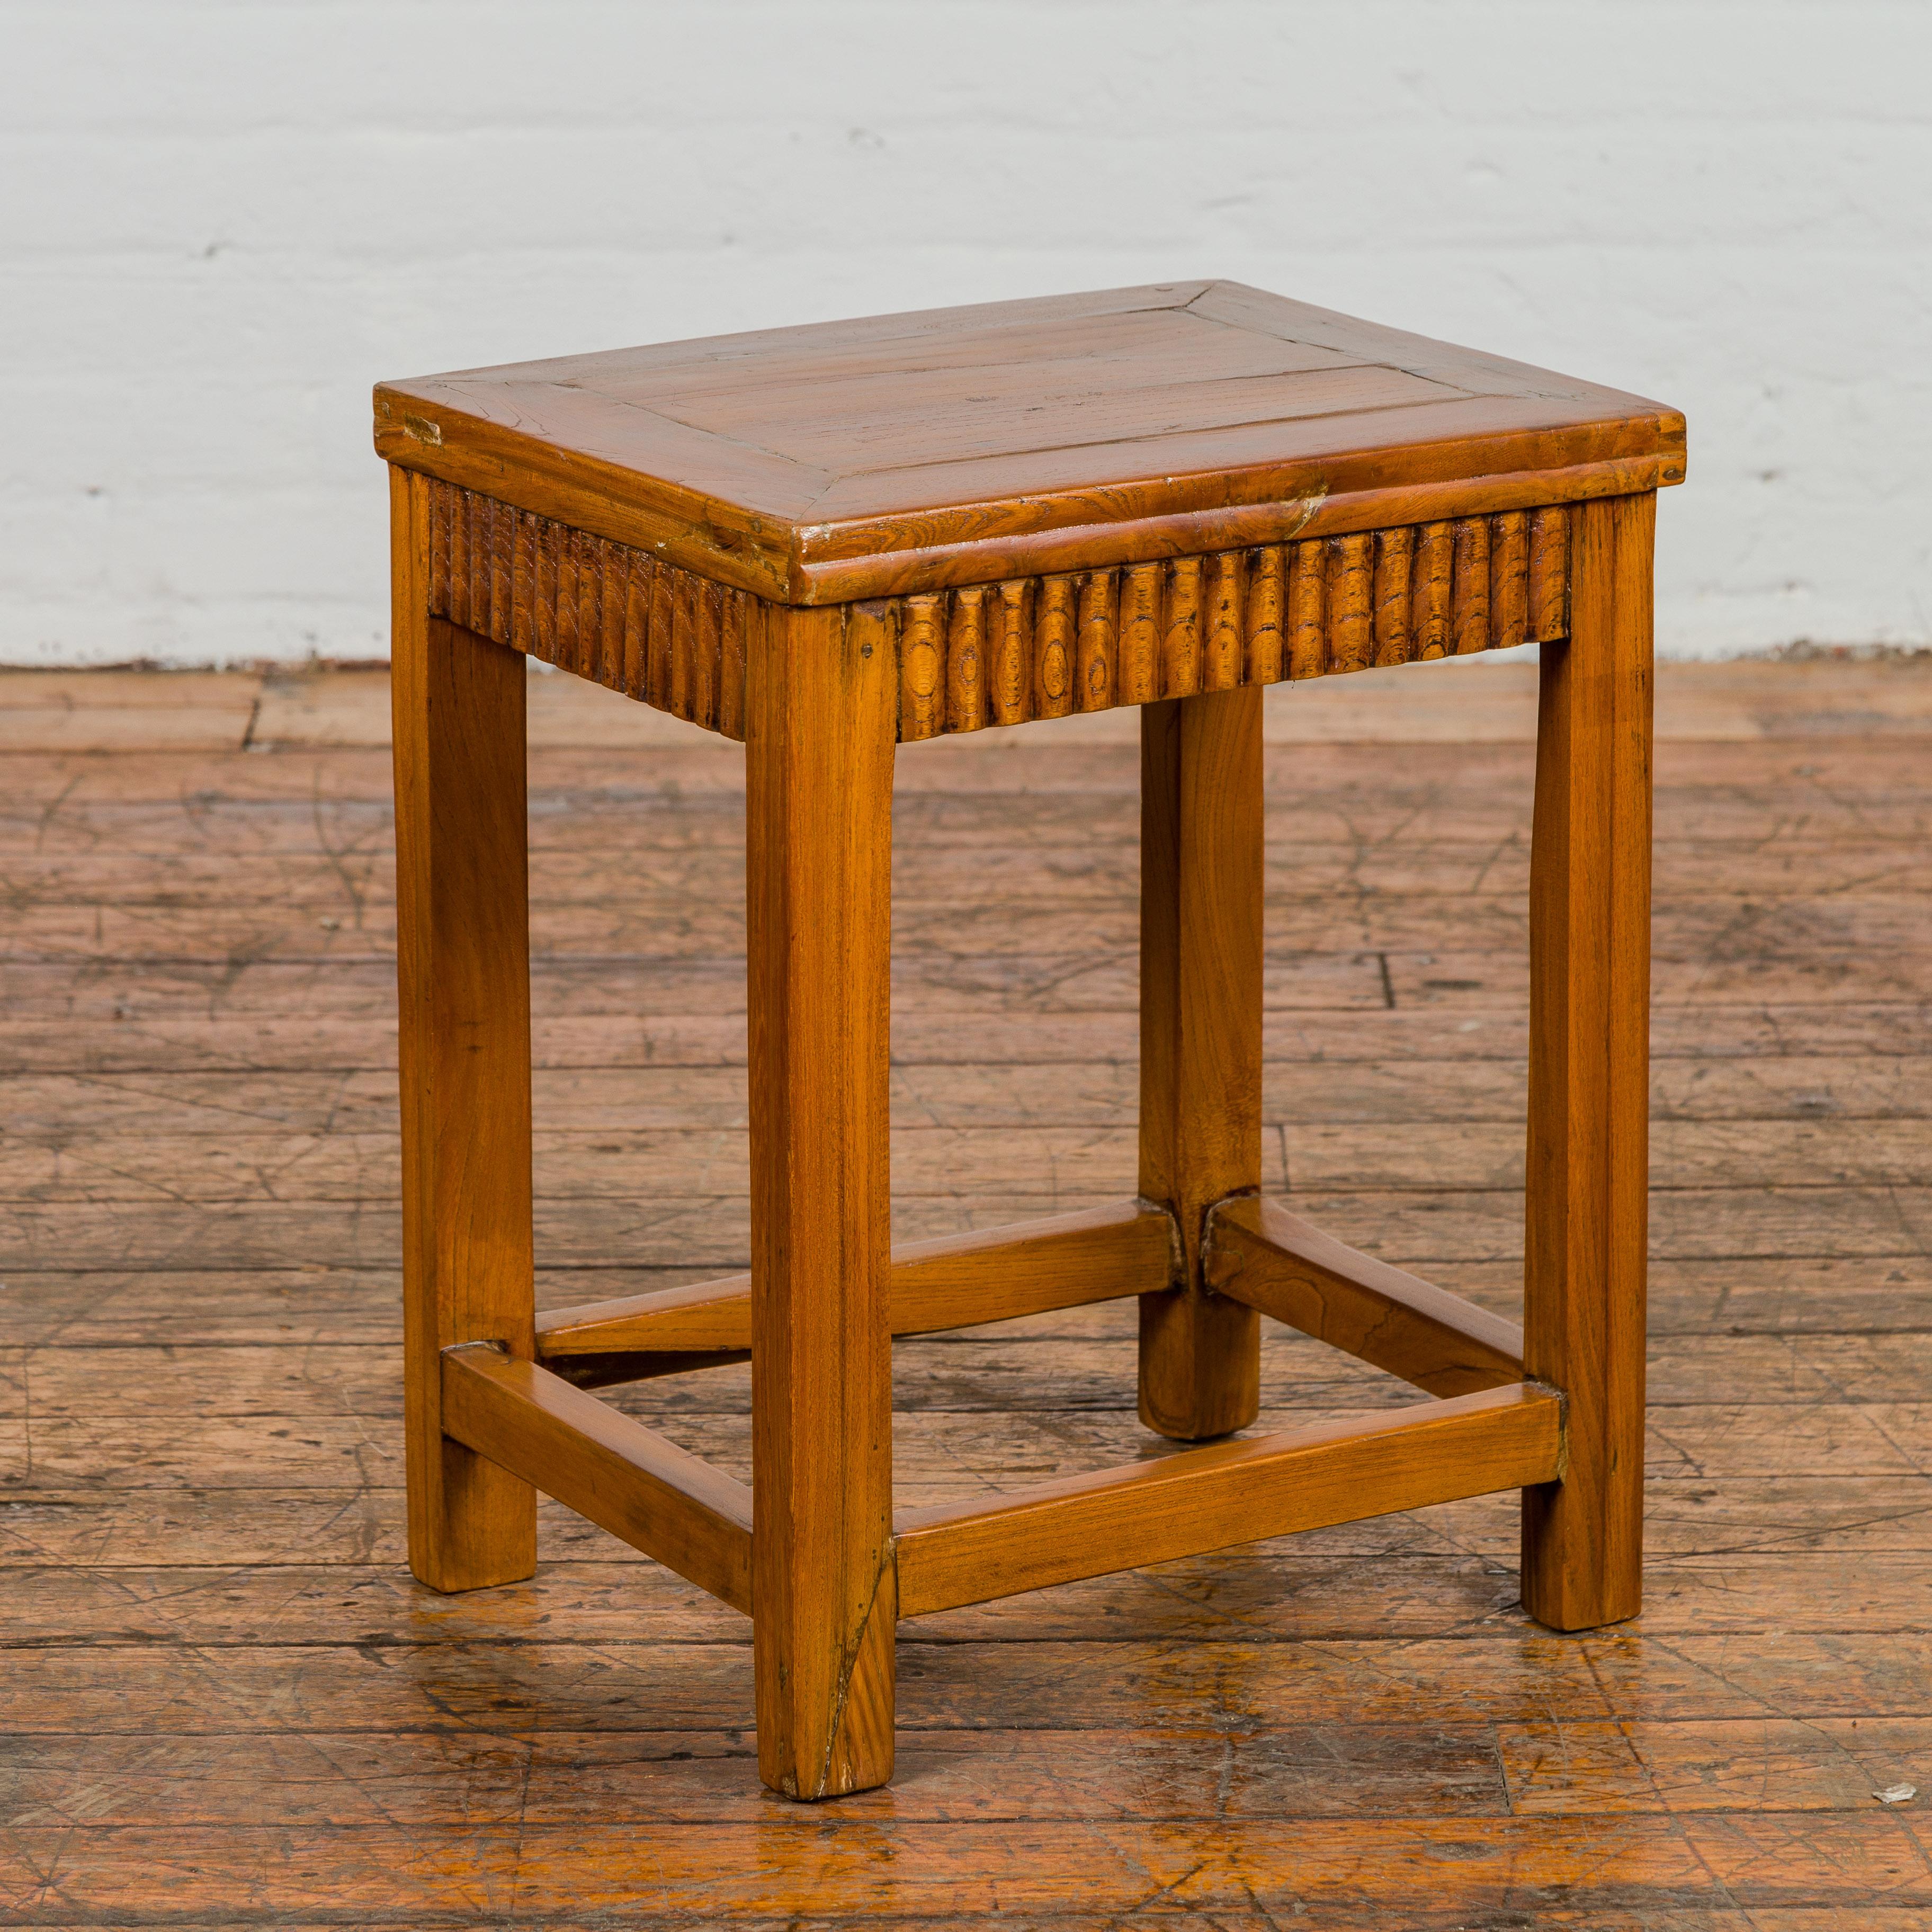 A Chinese late Qing Dynasty period side table with carved reeded apron on all sides, straight legs and side stretchers. This Chinese late Qing Dynasty period side table is distinguished by its carved reeded apron, which gracefully adorns all sides,